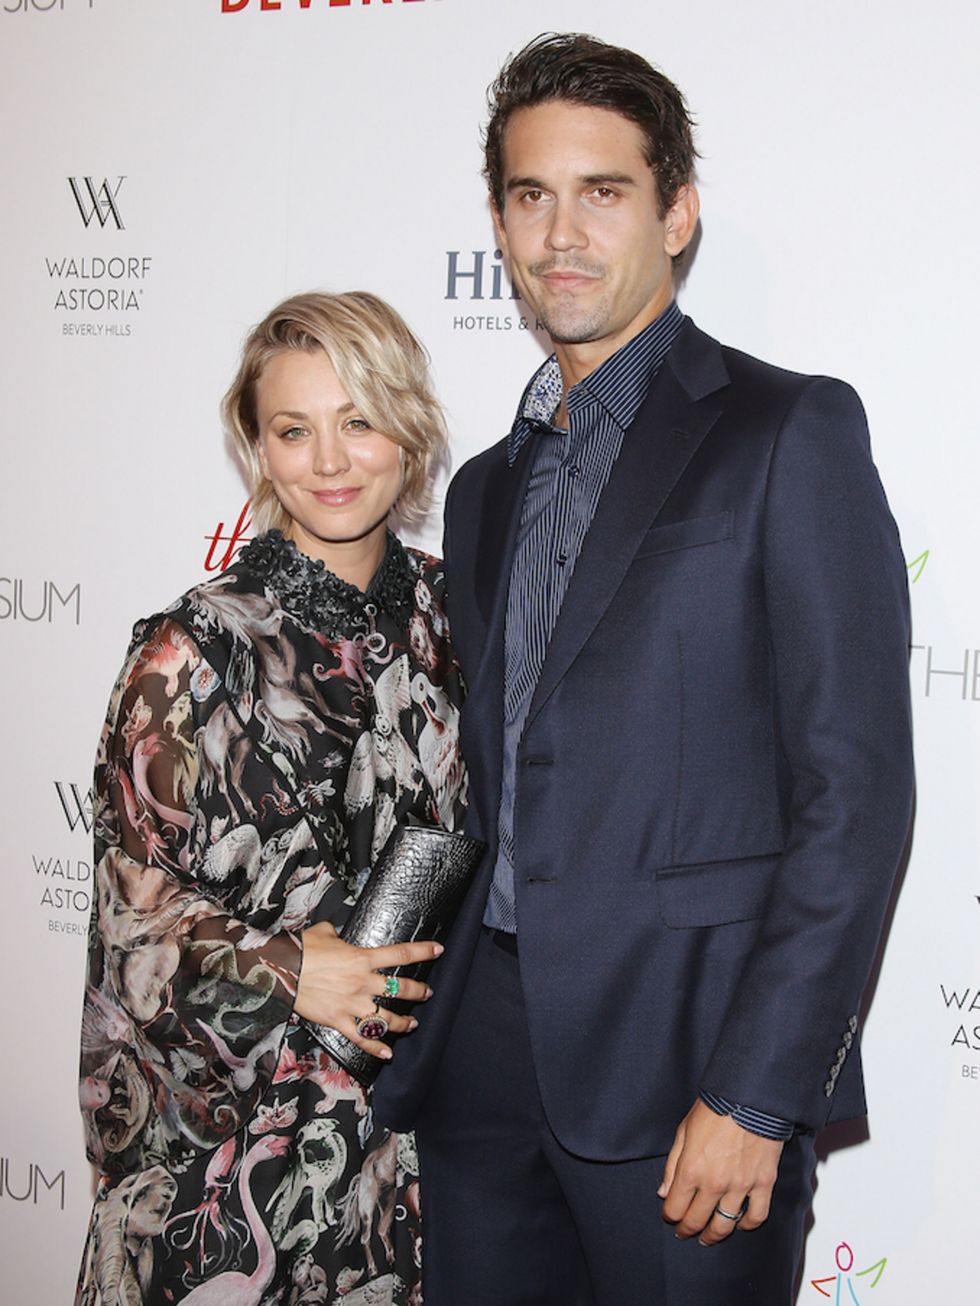 Kaley Cuoco and Ryan Sweeting announced their split in September 2015